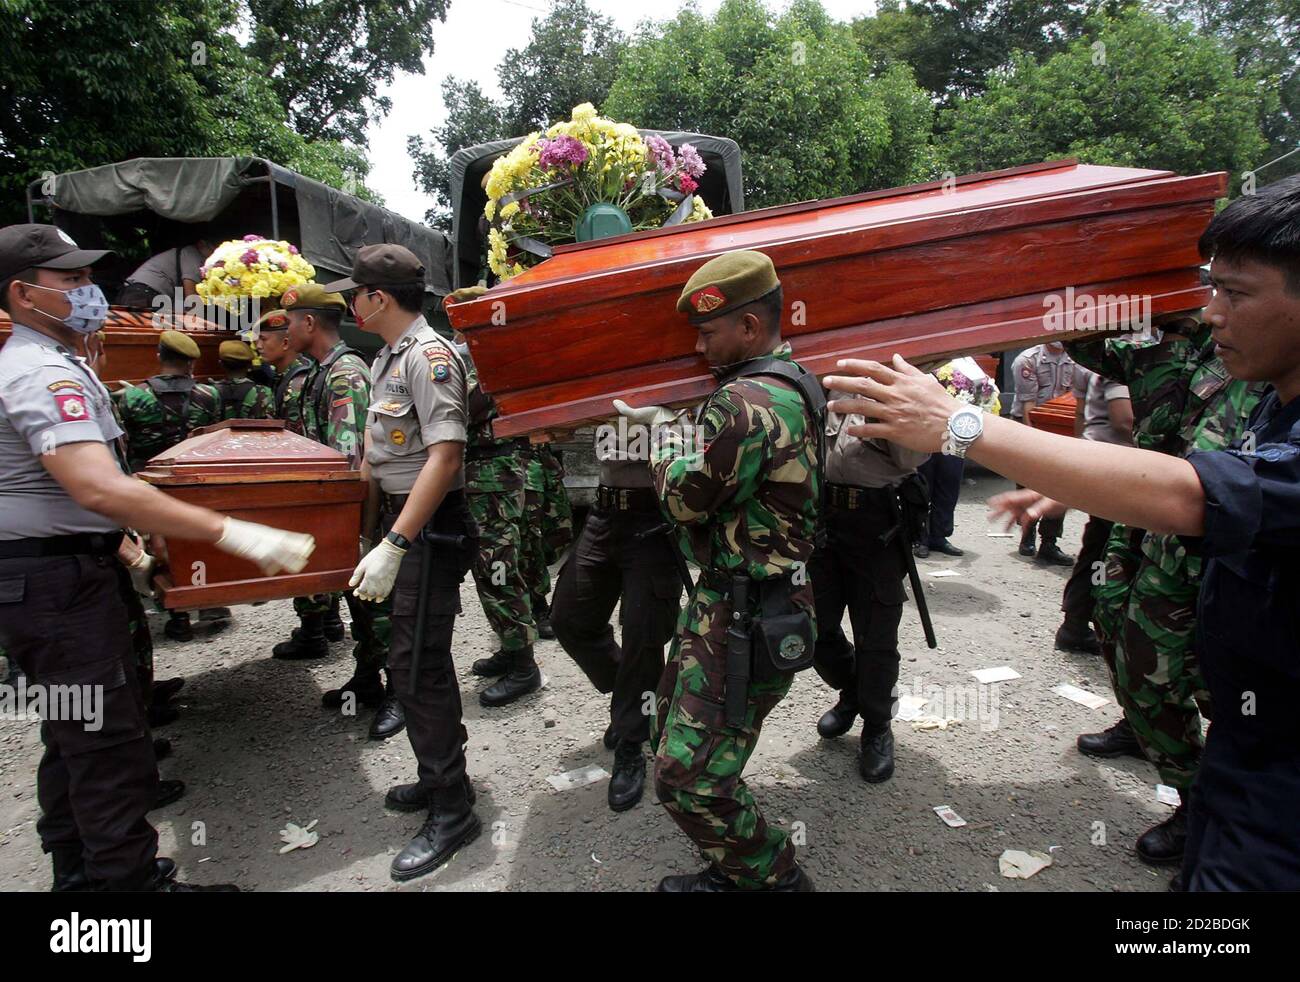 Indonesian soldiers and police carry coffins of unidentified bodies outside a morgue at a hospital in Medan, Indonesia, September 7, 2005. A preliminary probe into the crash of an Indonesian airliner that killed 149 people has found a fuel problem with one of the plane's engines, a transport safety official said on Wednesday. Authorities prepared a mass funeral for 57 victims whose bodies were too charred to identify. They will be buried in a field on Wednesday where the remains of victims from two previous air crashes near Indonesia's third biggest city also lie. REUTERS/Supri  supri/PN Stock Photo